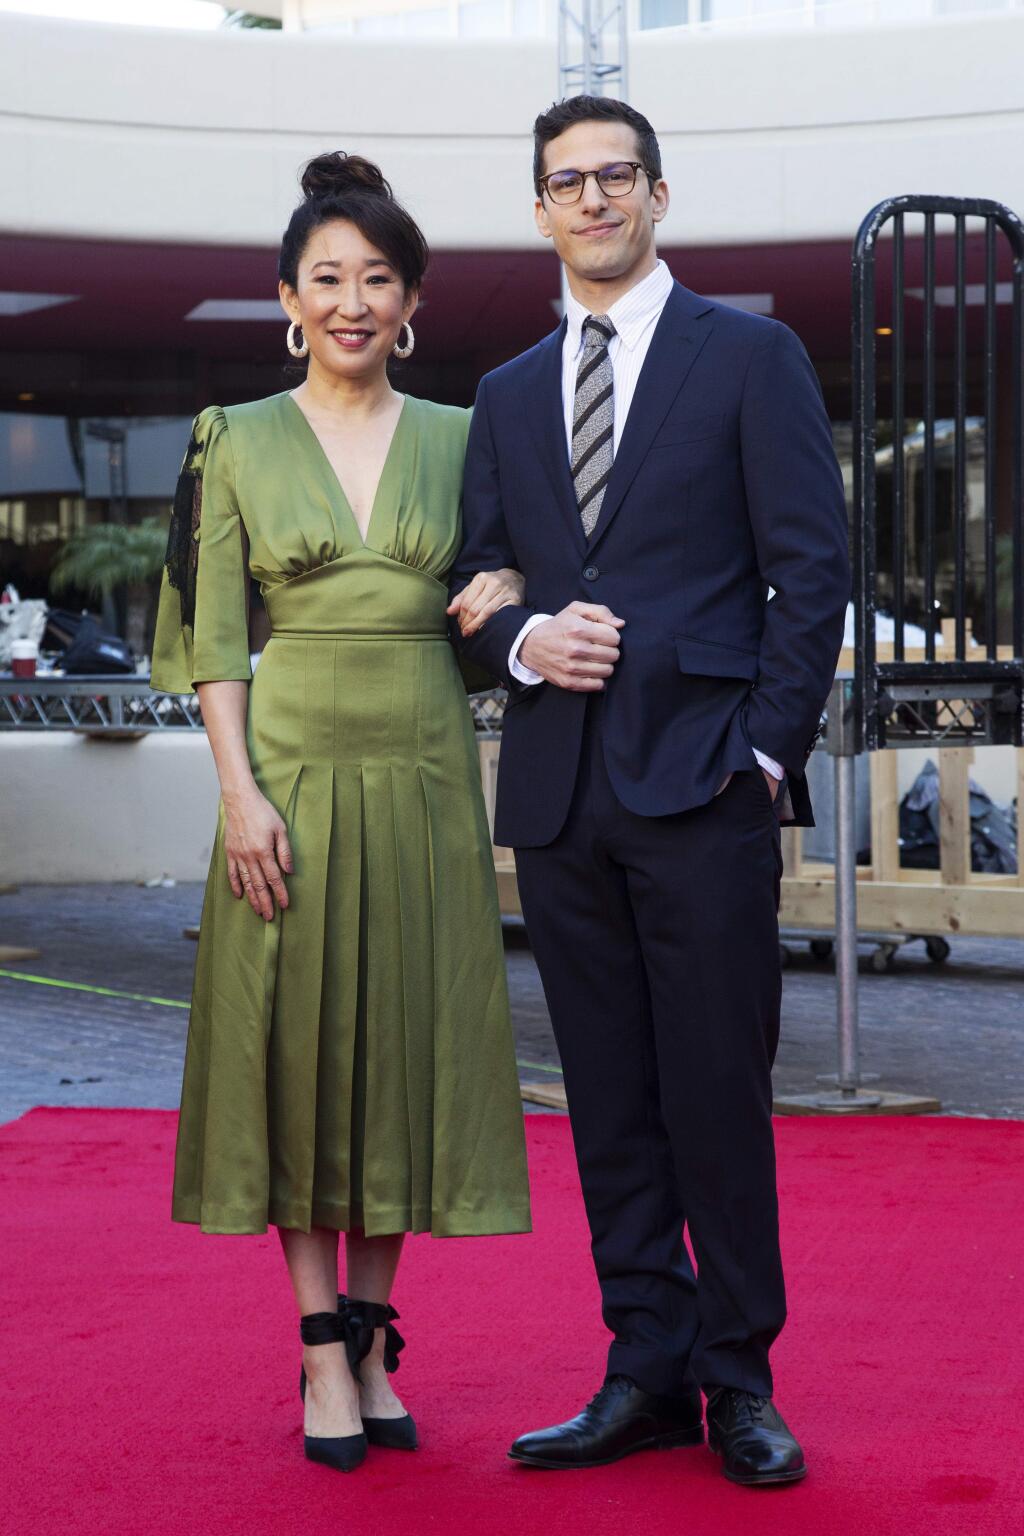 Sandra Oh, left, and Andy Samberg pose for photos on the red carpet at the 76th Annual Golden Globe Awards Preview Day at The Beverly Hilton on Thursday, Jan. 3, 2019, in Beverly Hills, Calif. (Photo by Willy Sanjuan/Invision/AP)